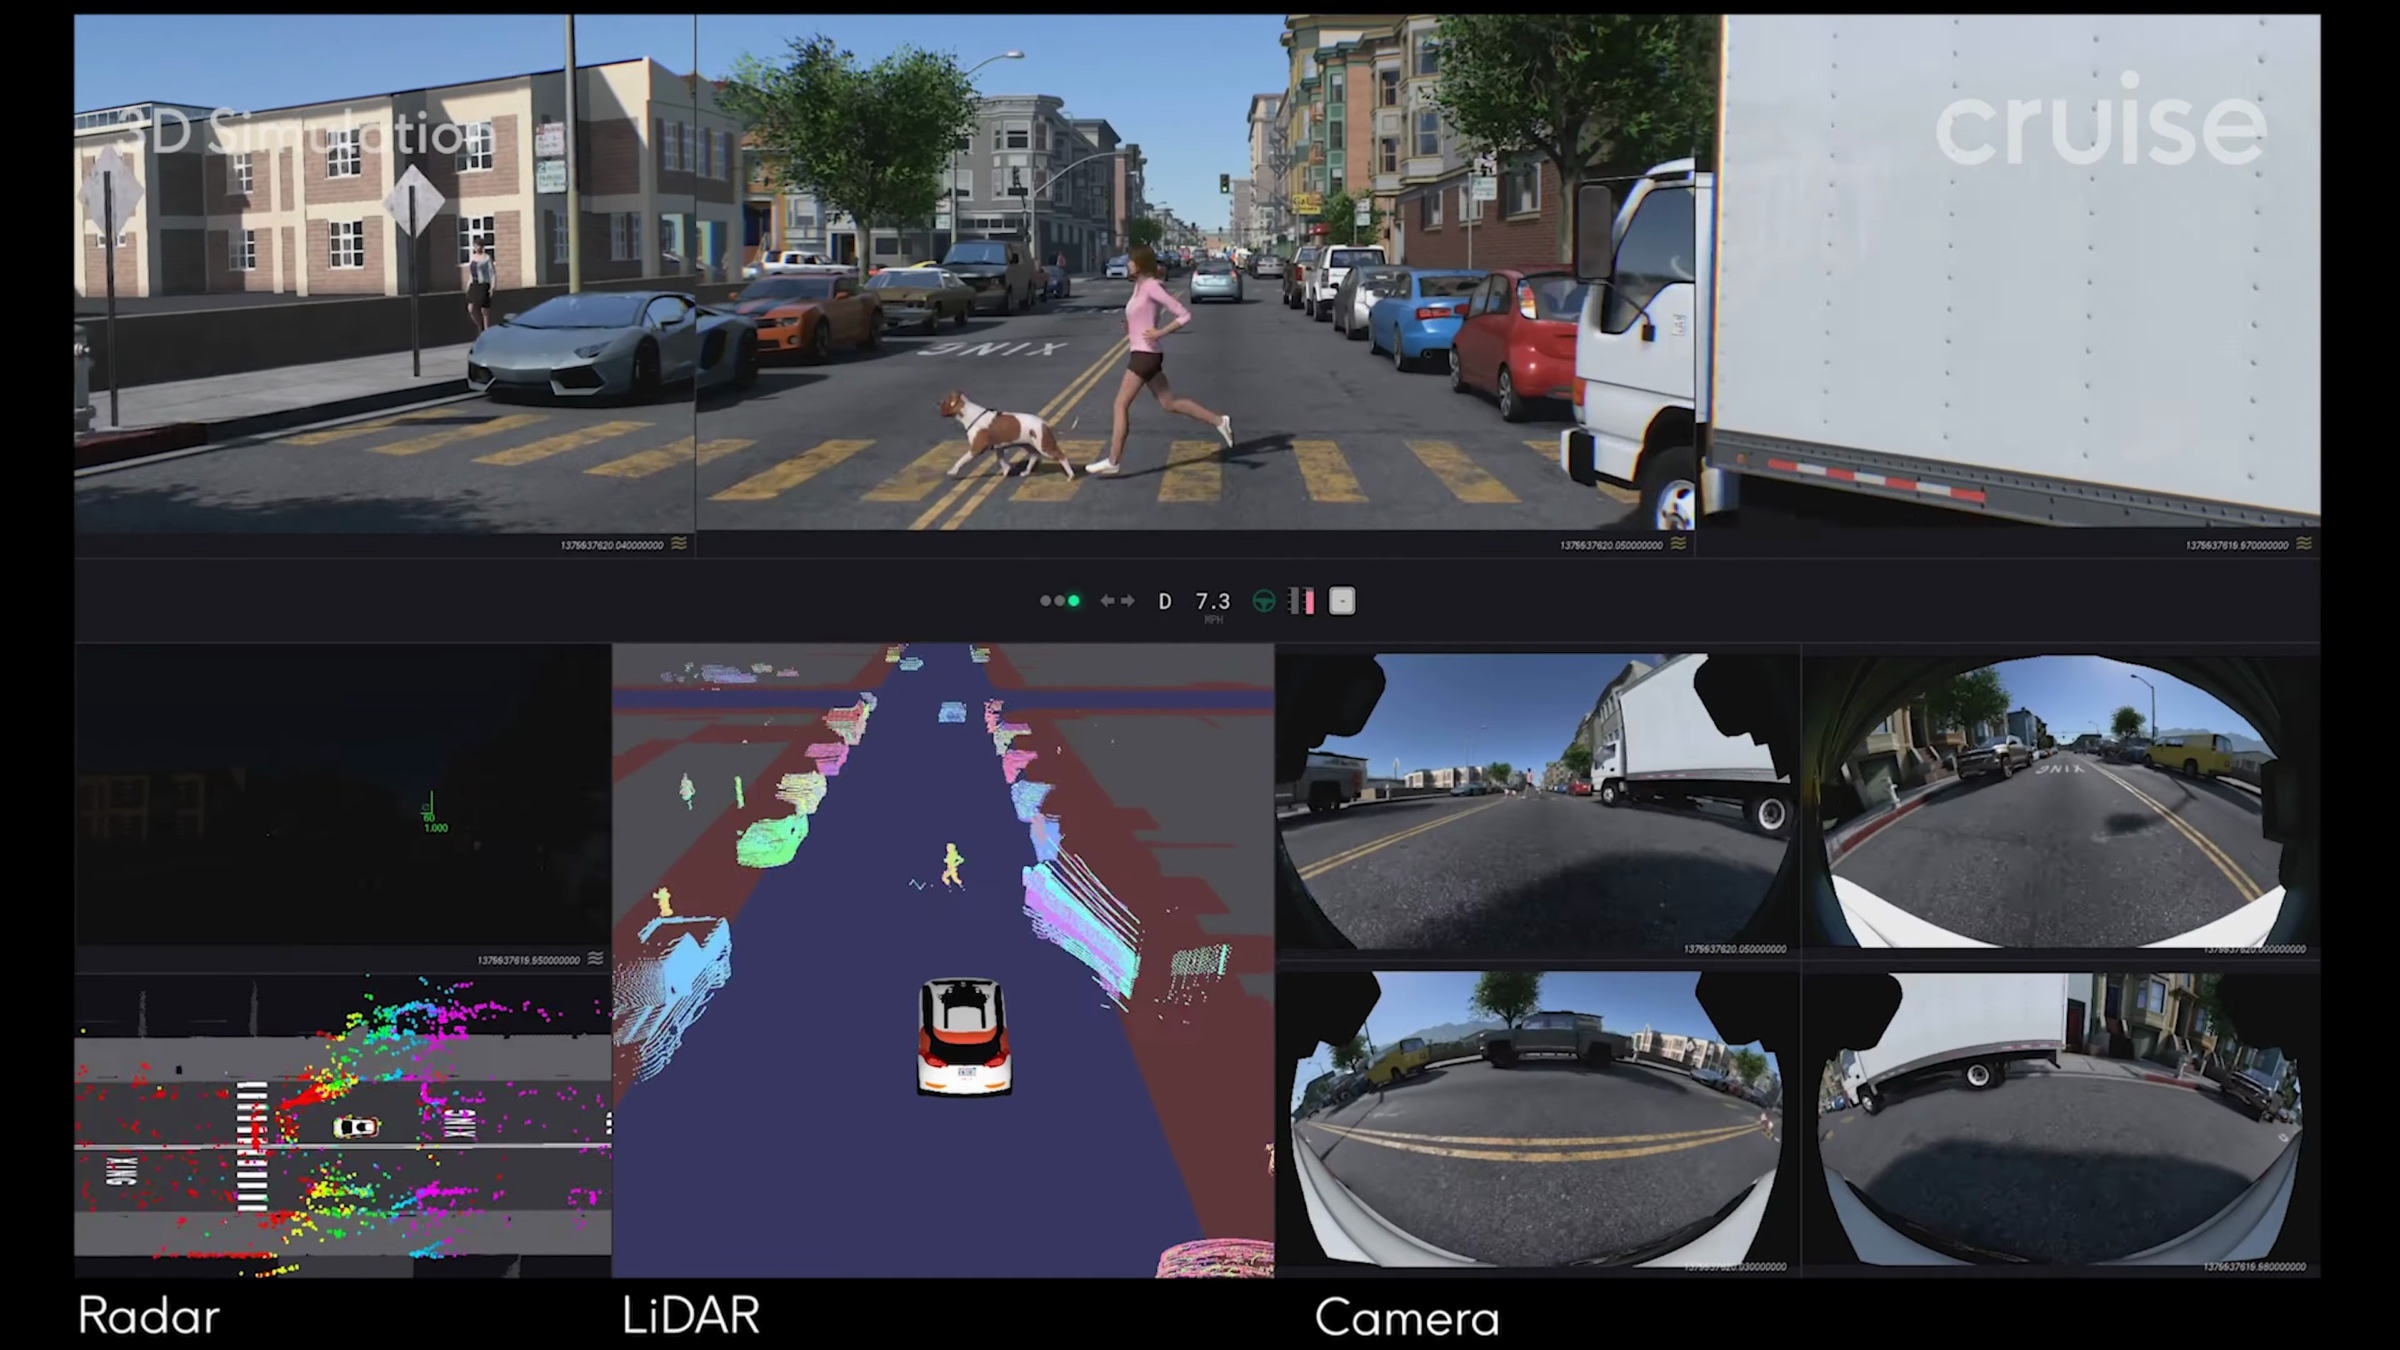 A screenshot from Cruise simulation. The top row contains a panoramic image of the road ahead, including a woman and a dog crossing the street. The bottom left contains radar and lidar data visualized as colorful dots with a Cruise vehicle in the center of each. The bottom right contains camera images of the surroundings, including parked cars and a white van entering the road.